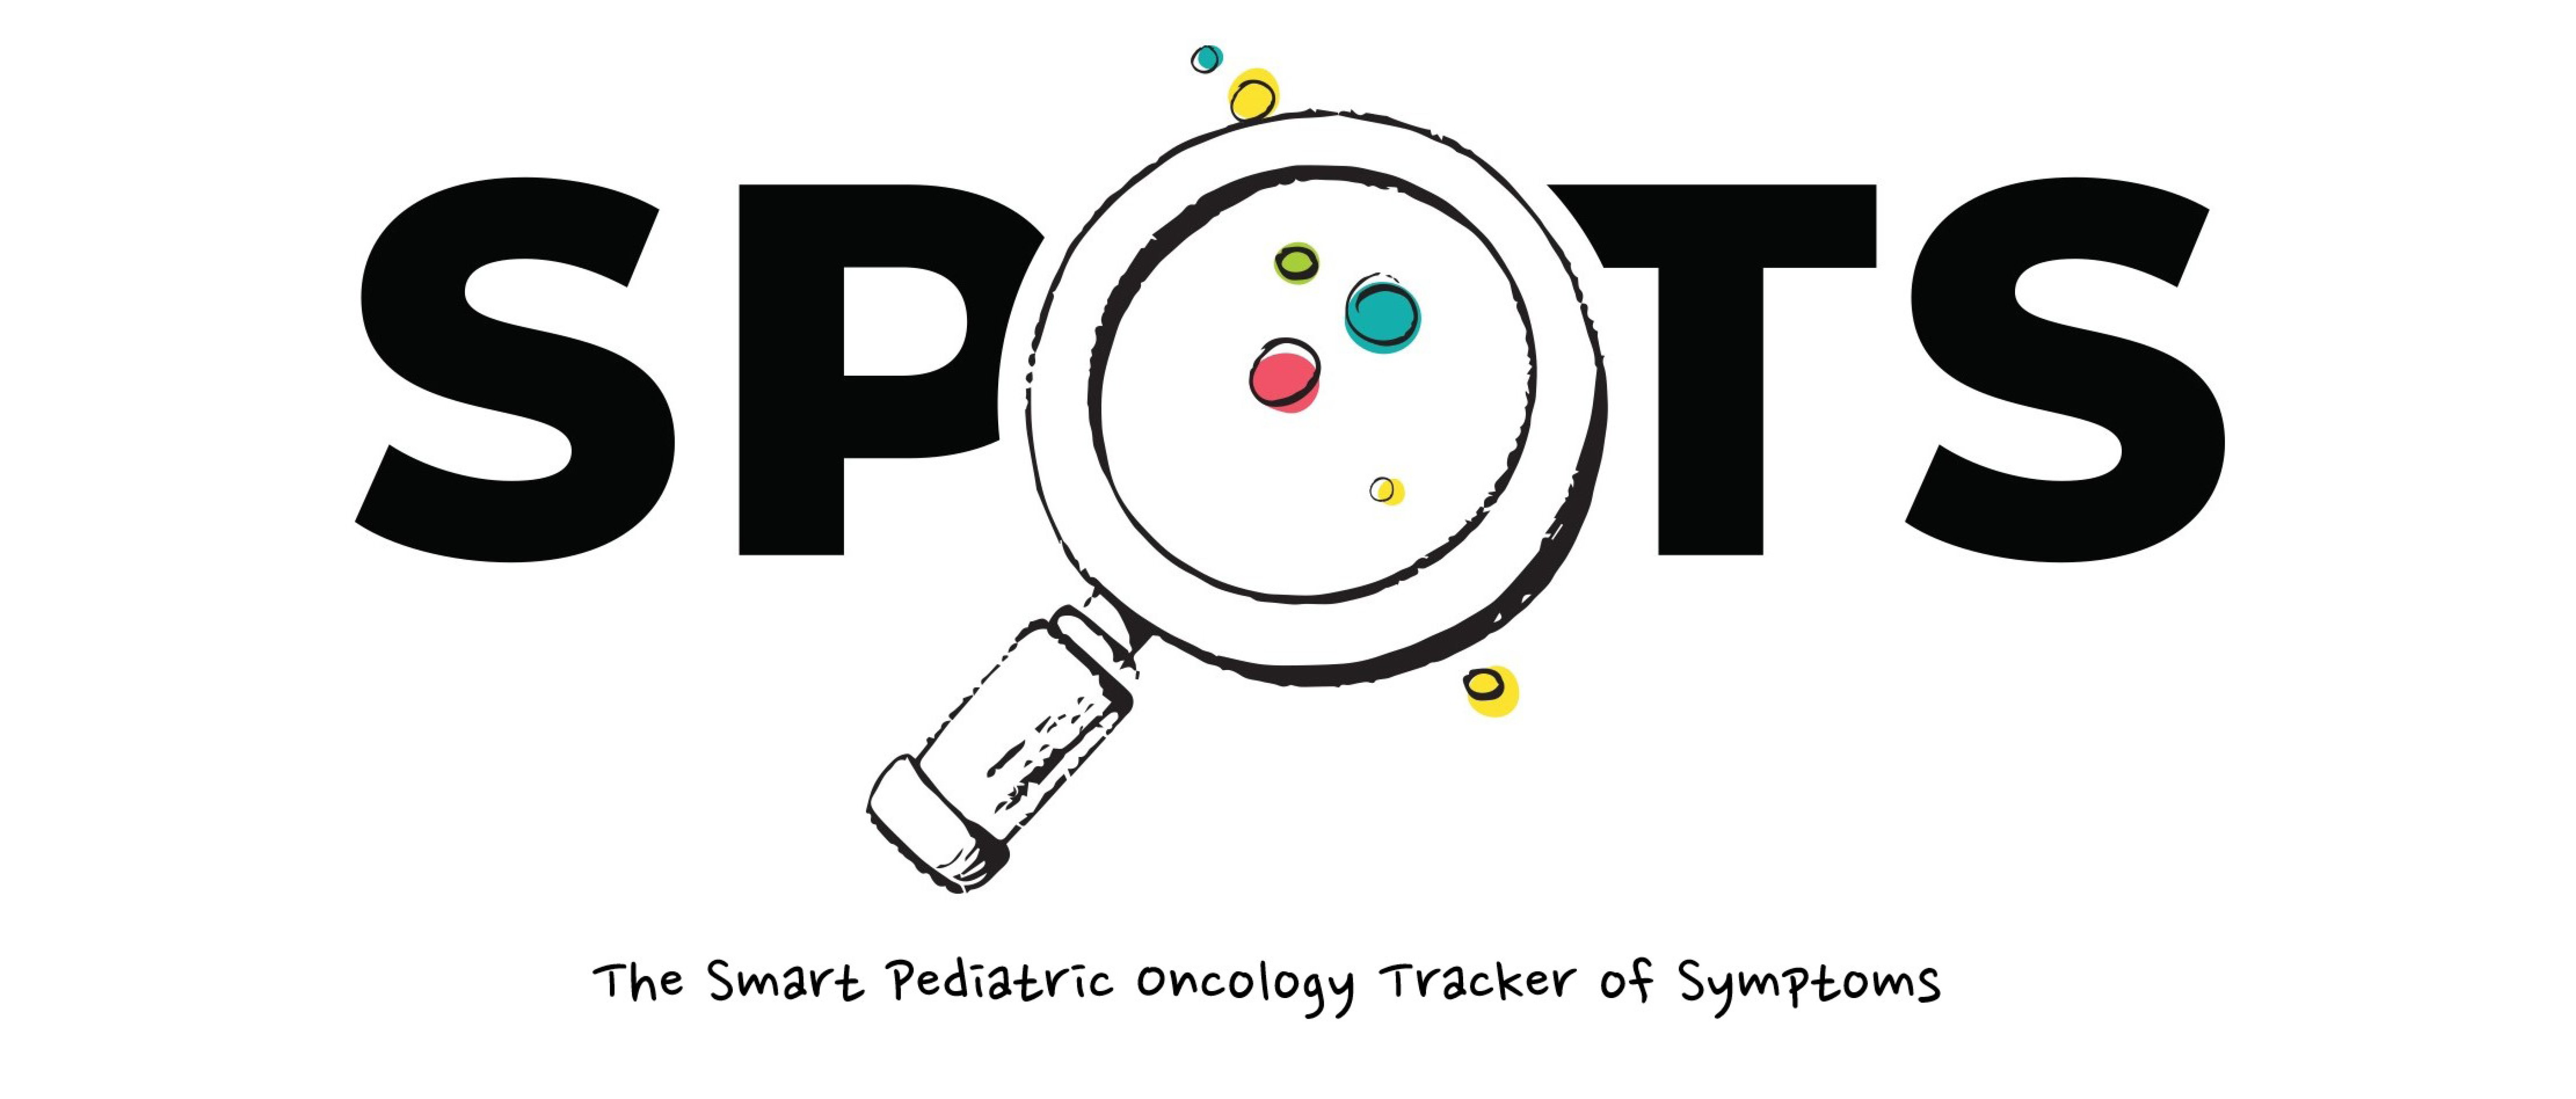 The Smart Pediatric Oncology Tracker of Symptoms